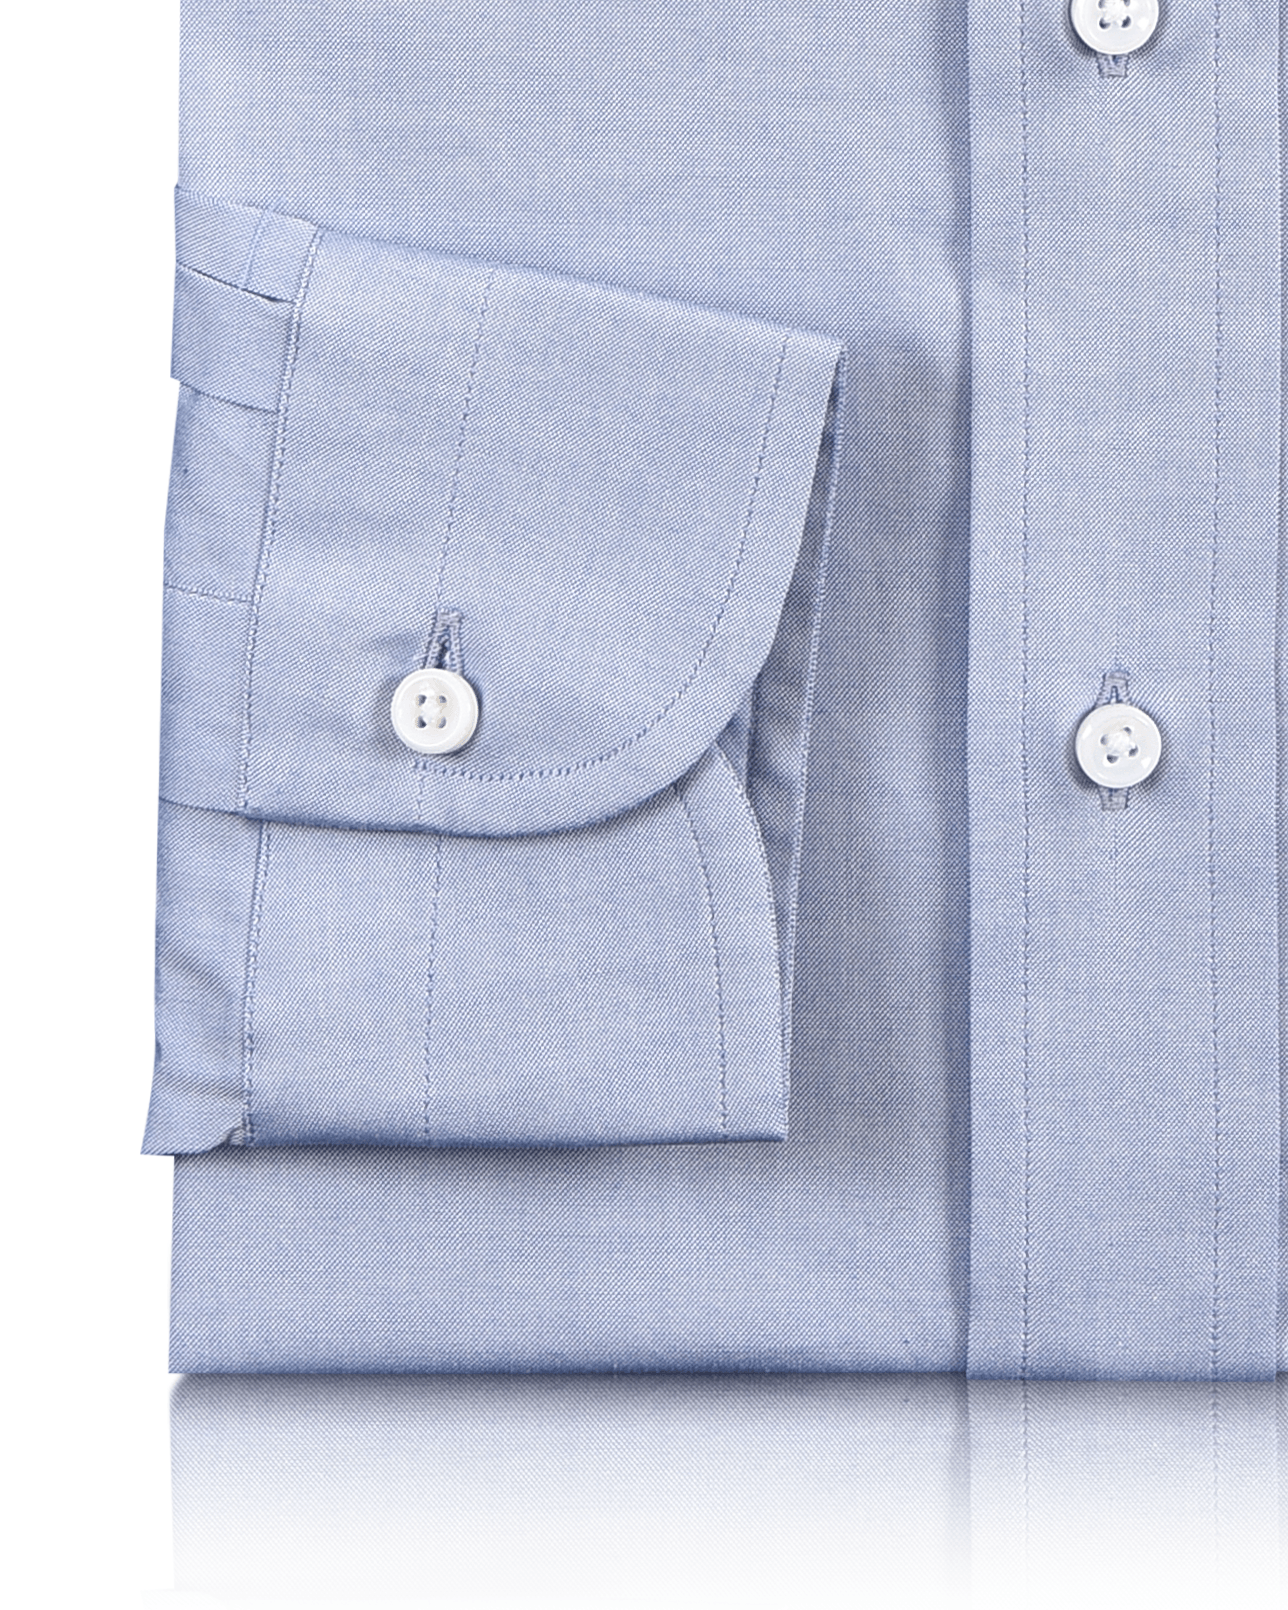 Cuff of the custom oxford shirt for men by Luxire in blue pinpoint